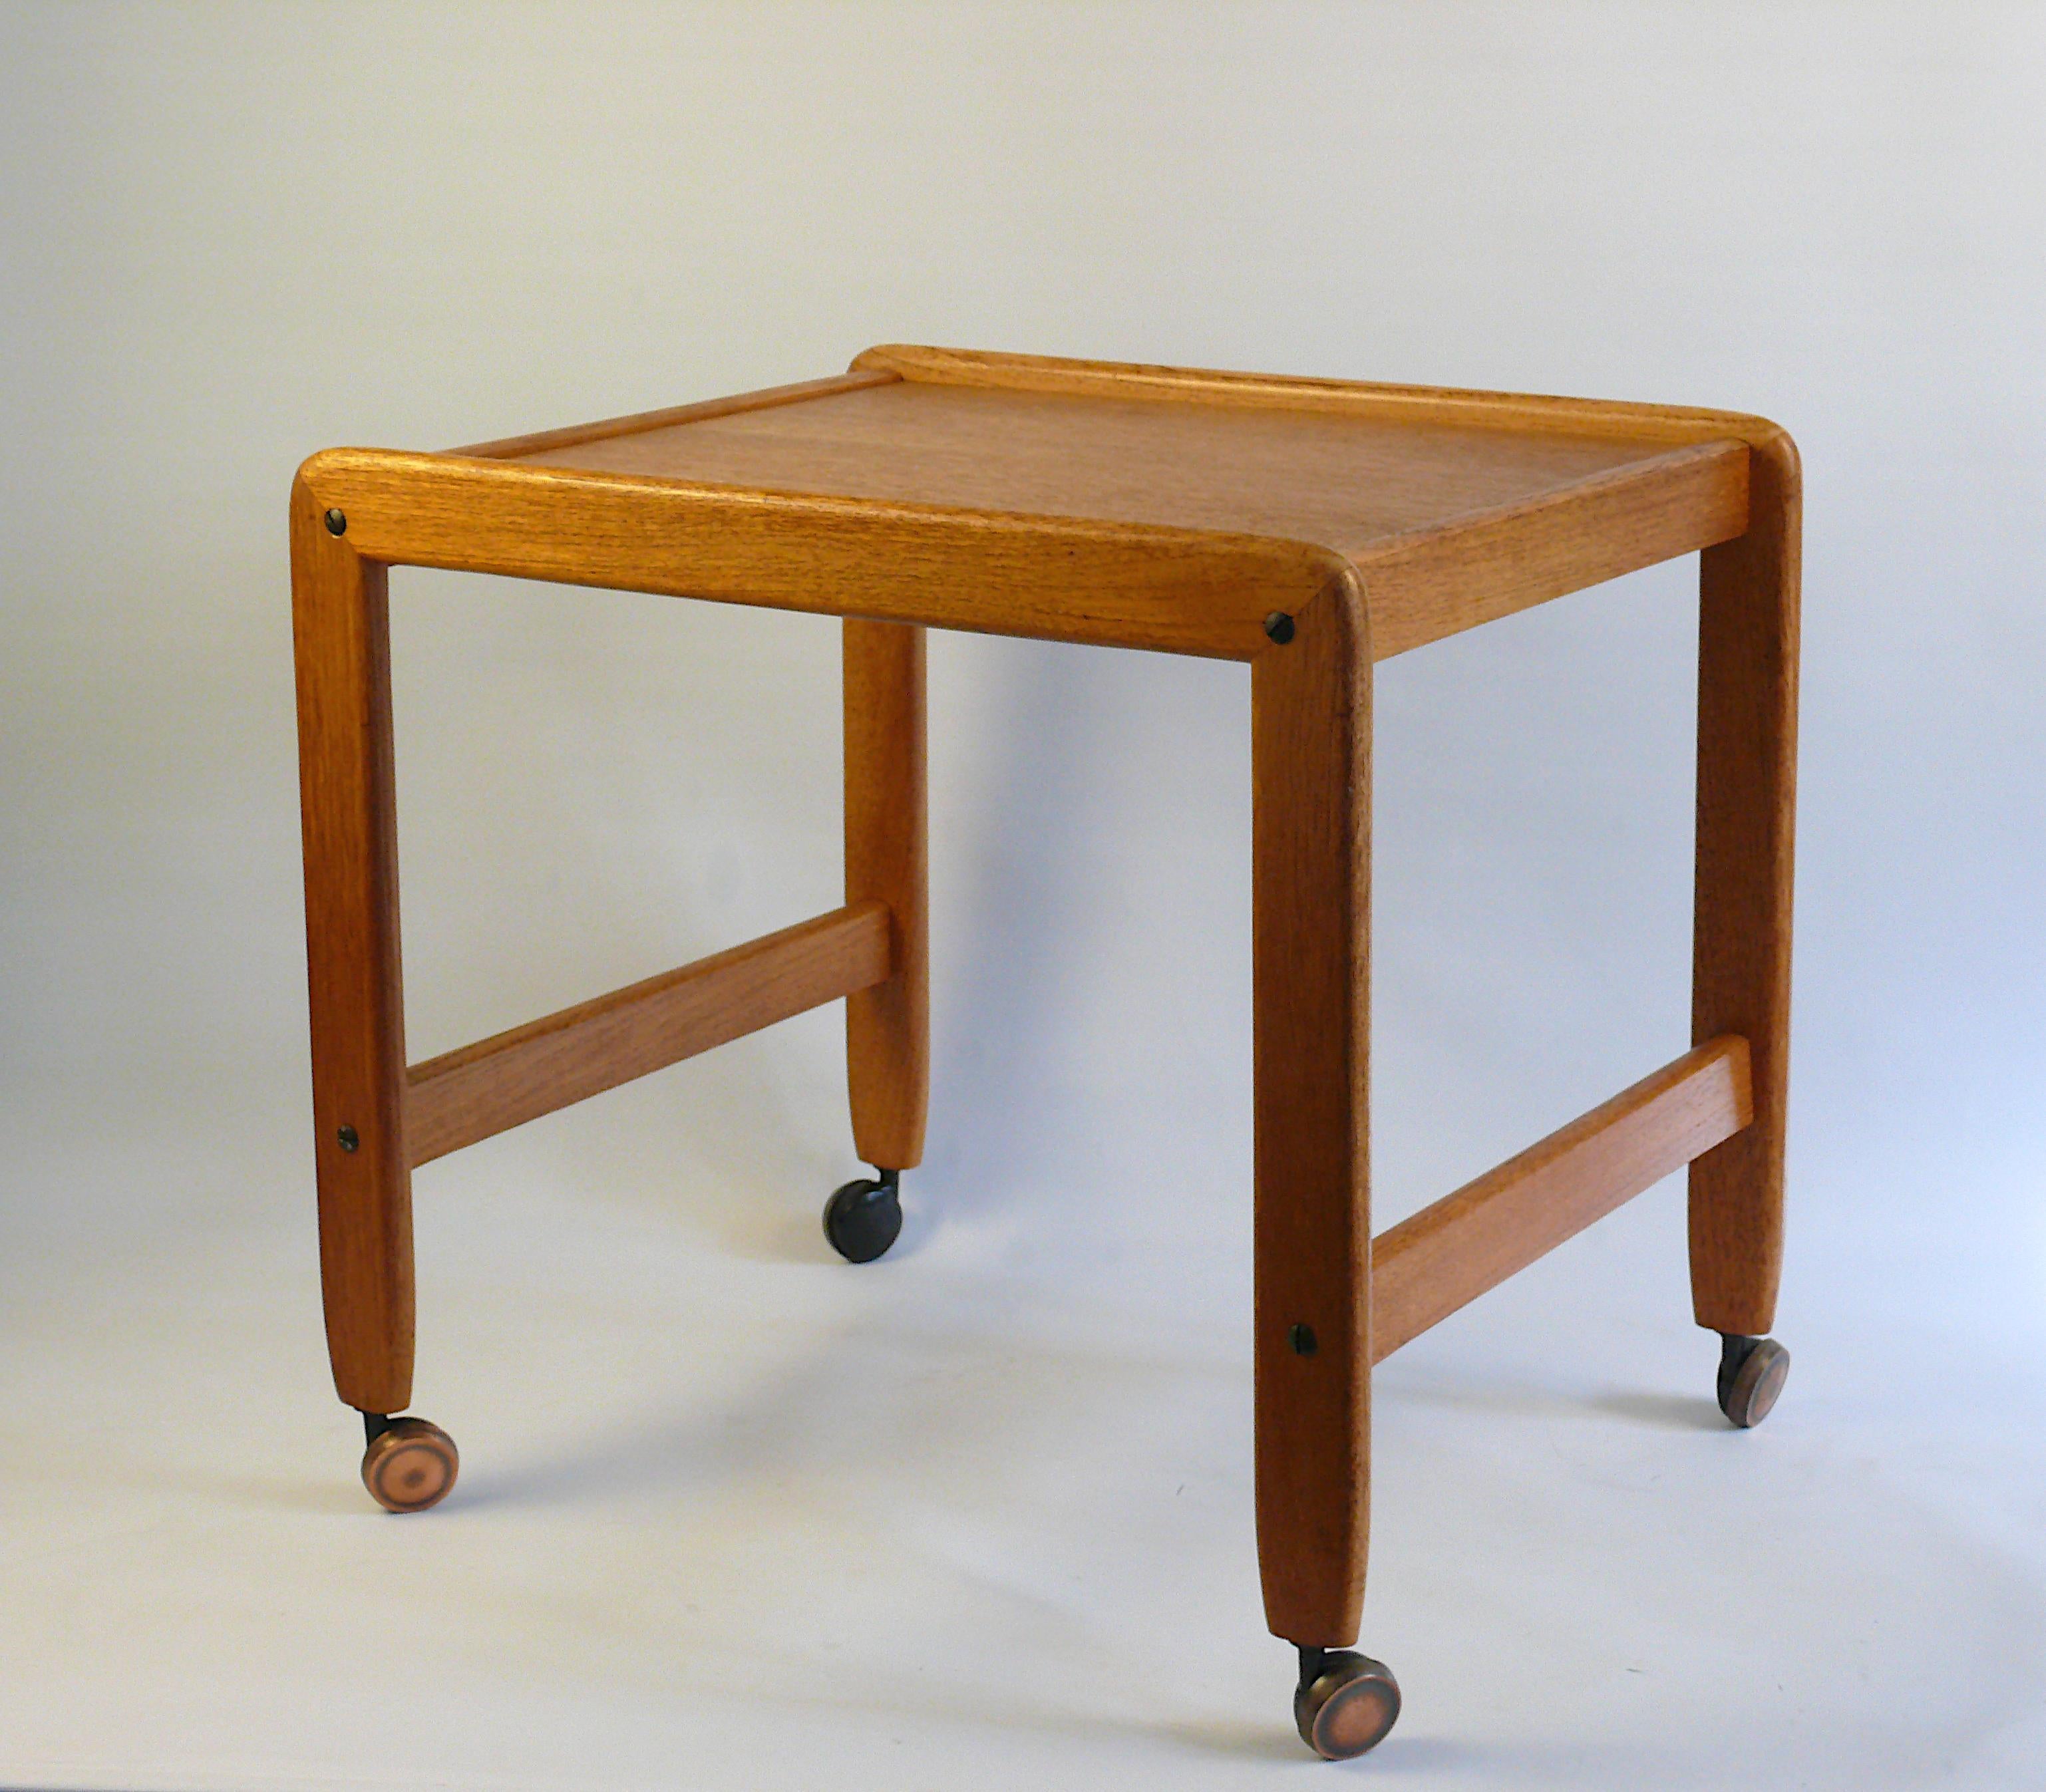 Well-preserved teak side table/serving trolley in Danish design from the 1960s. The wooden profiles have rounded edges. The table is screwed together and can be dismantled if necessary - it is sent assembled. The table is in good condition with